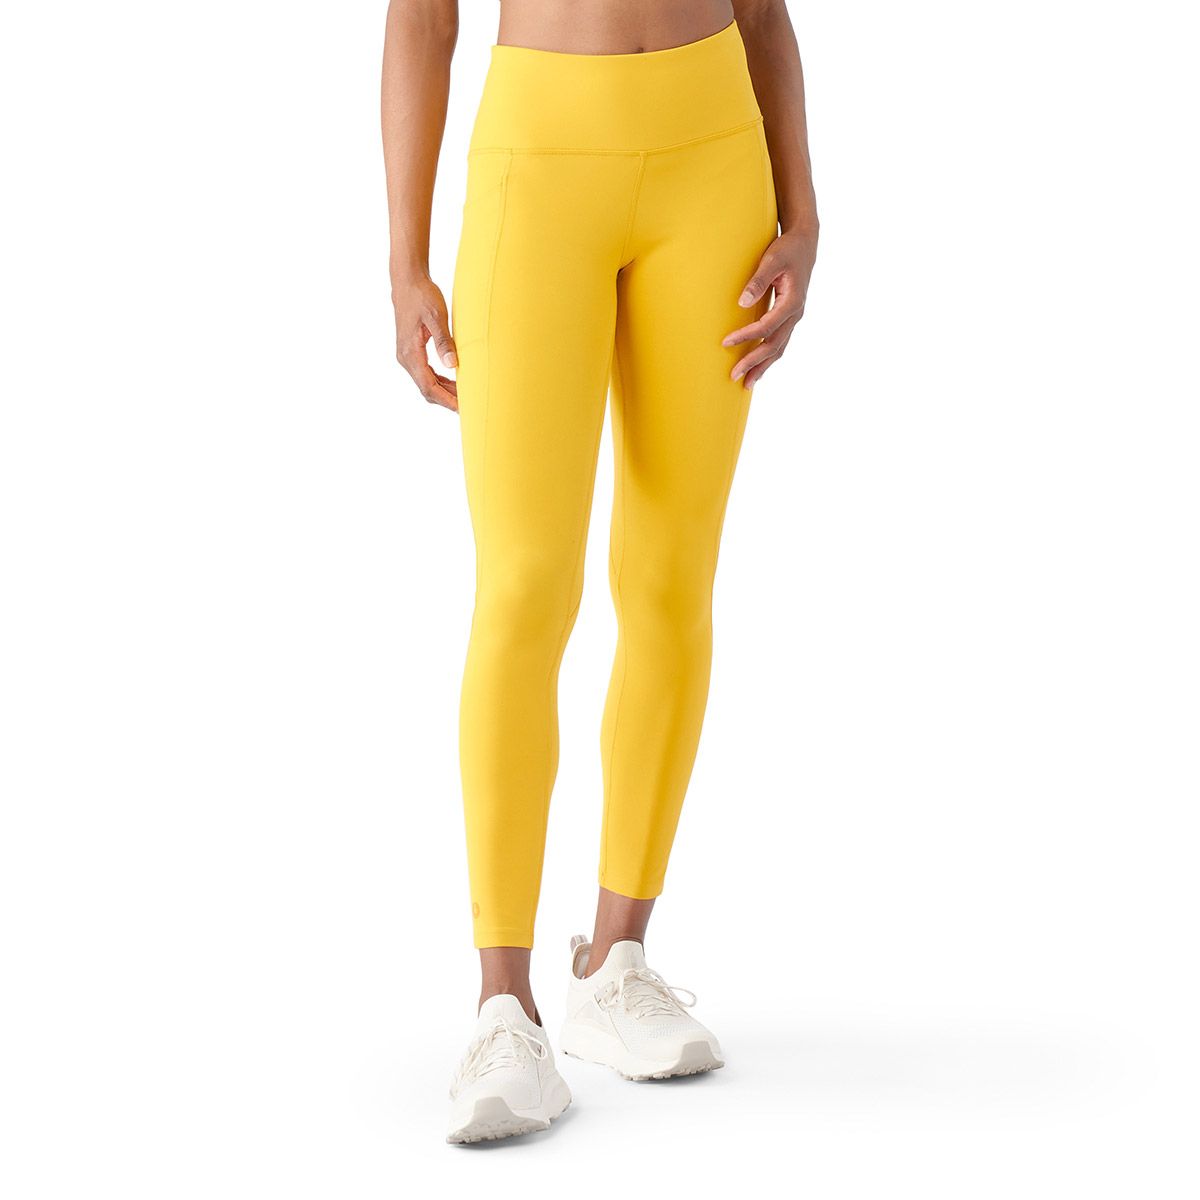 Solowomen - 😍 Women's Active Color Block Sports Leggings (S-L) 😍 by Yelete  starting at $34.50 Train on-trend in this color block legging designed in a  supportive compression fit to give you